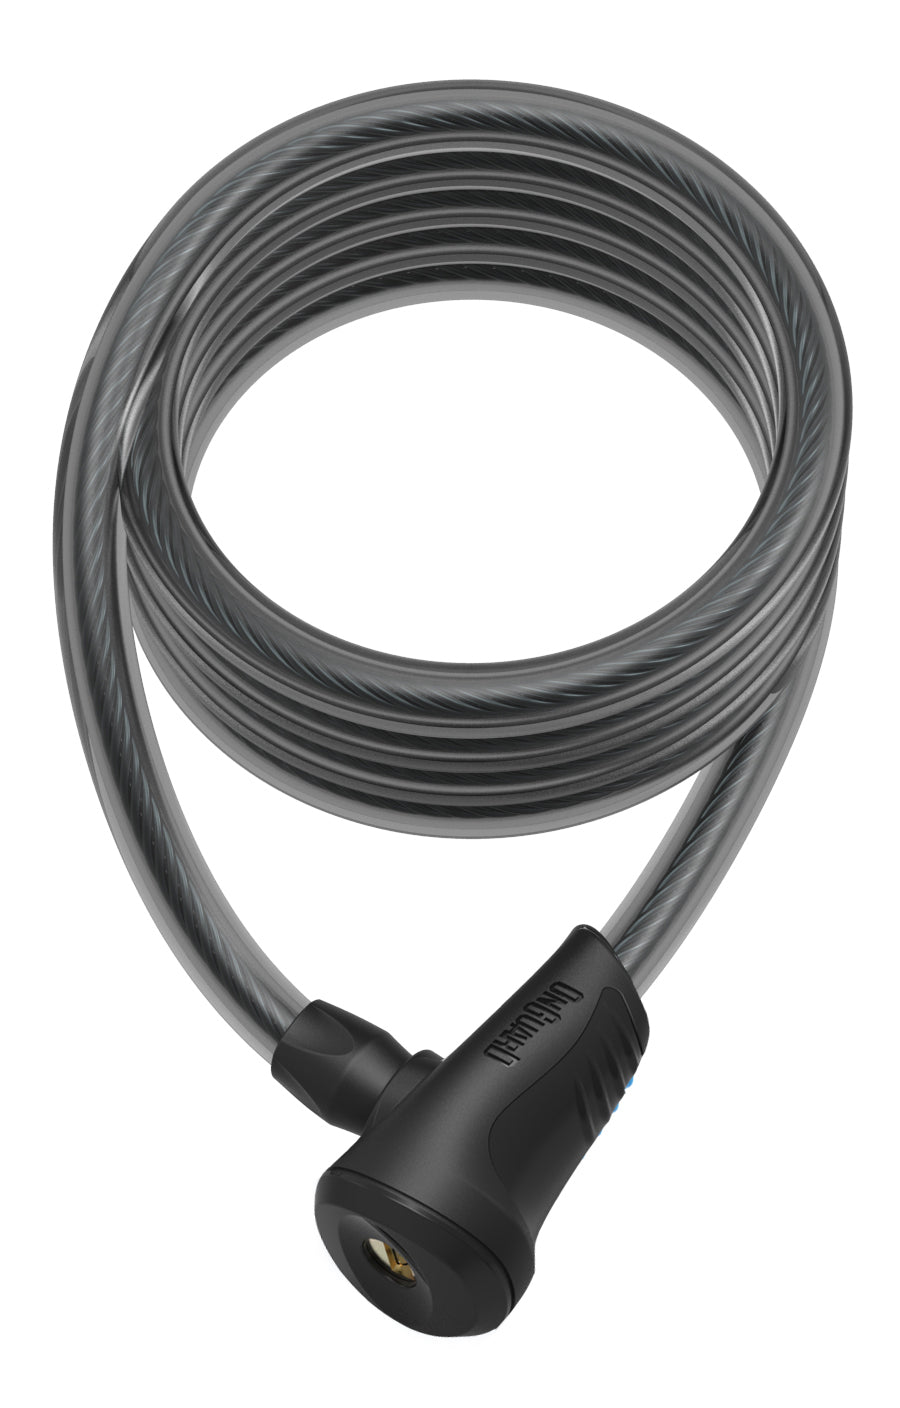 Oneguard Neons Coil Cable Lock